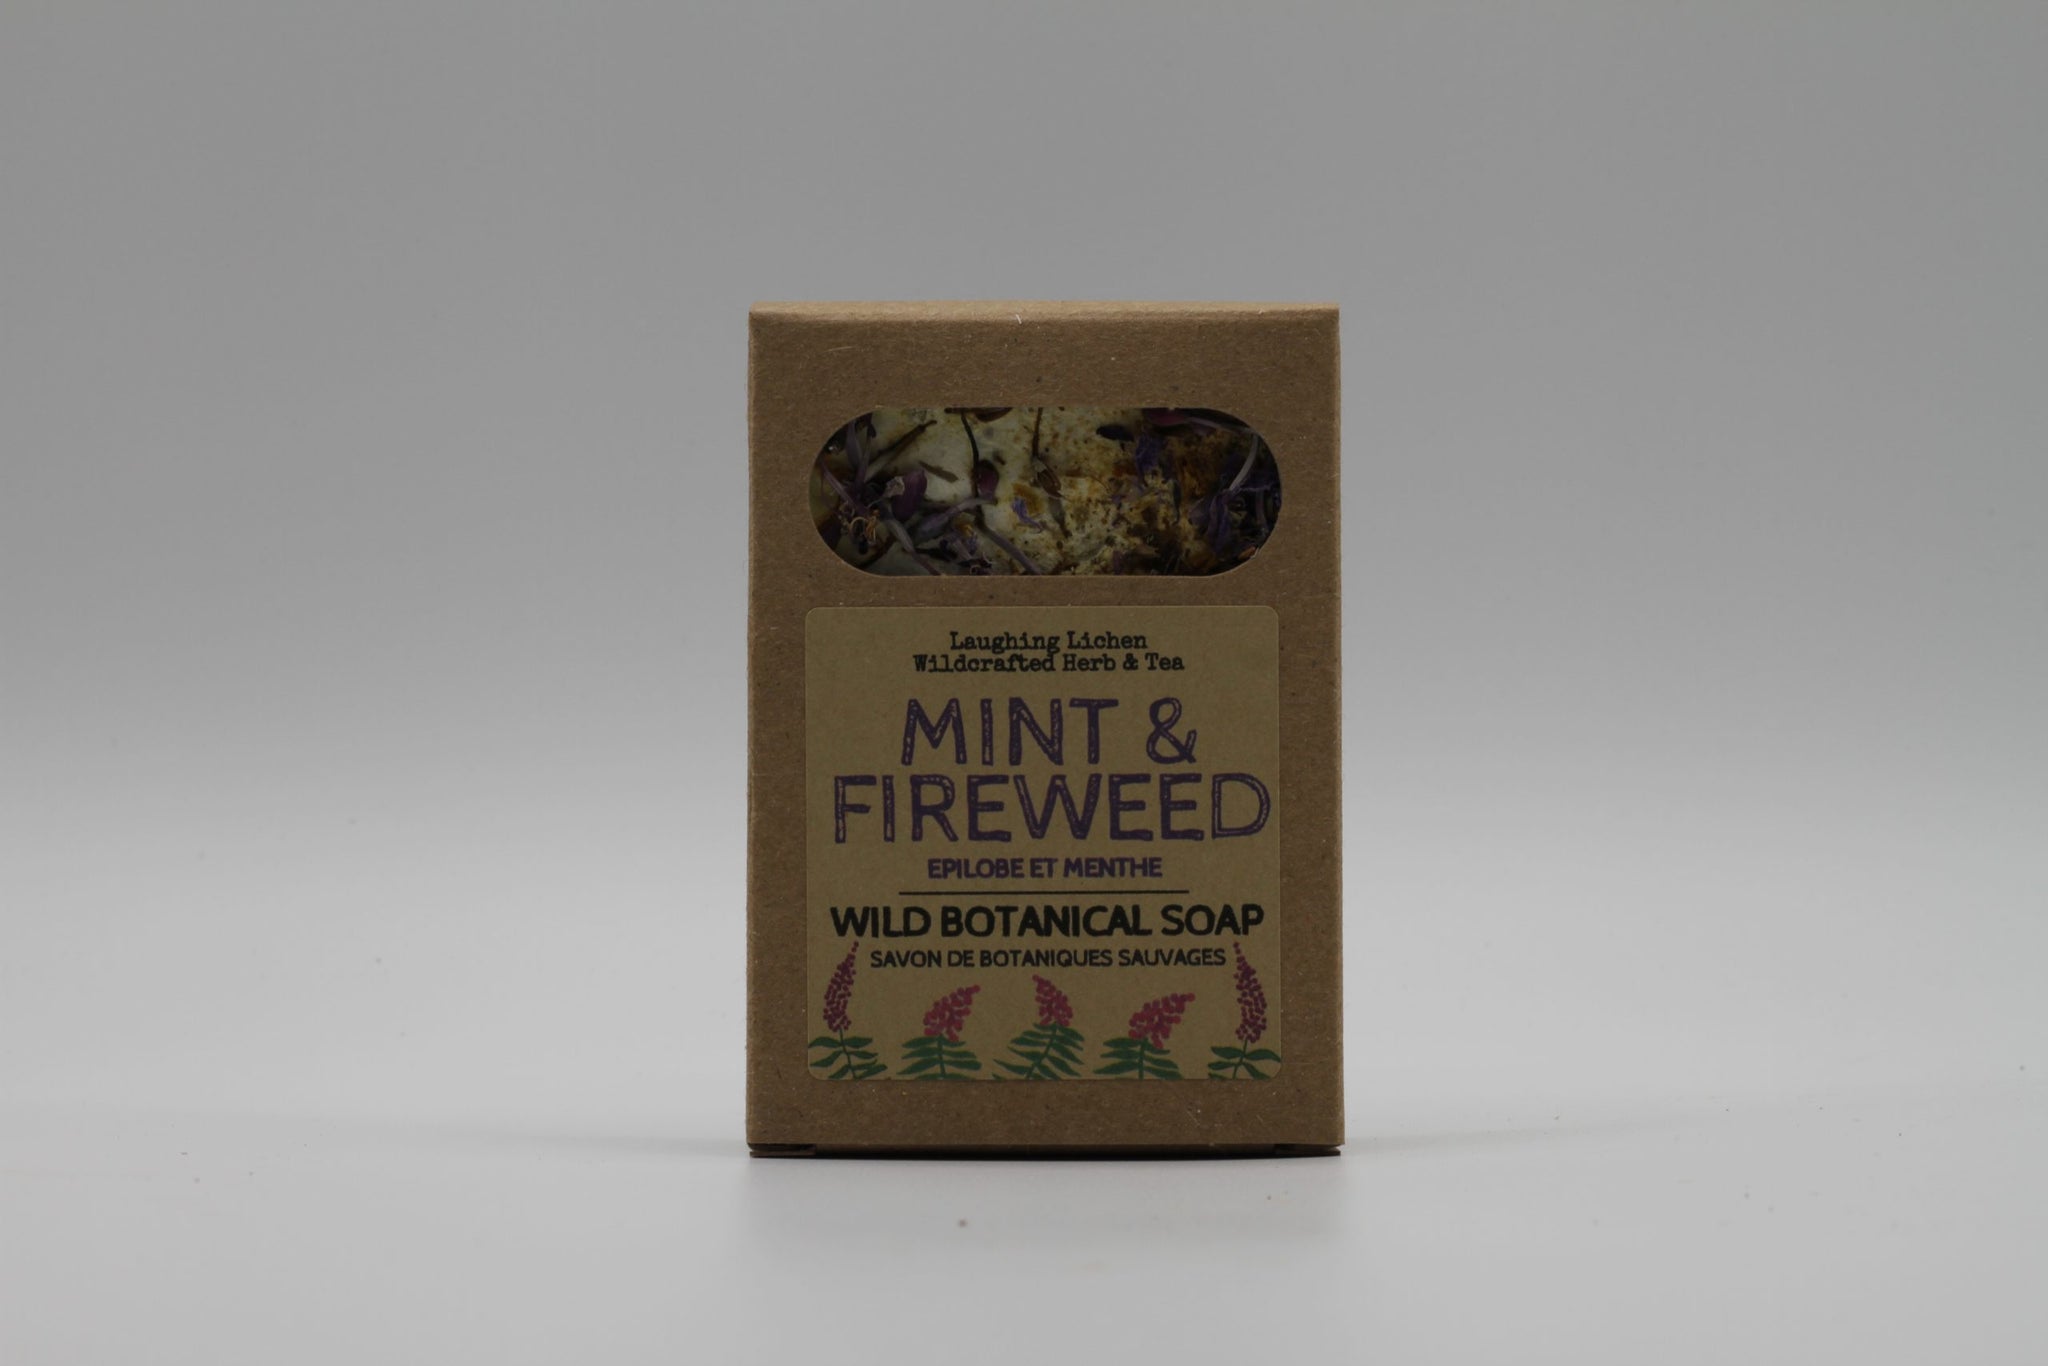 Laughing Lichen Fireweed & Mint  Soap